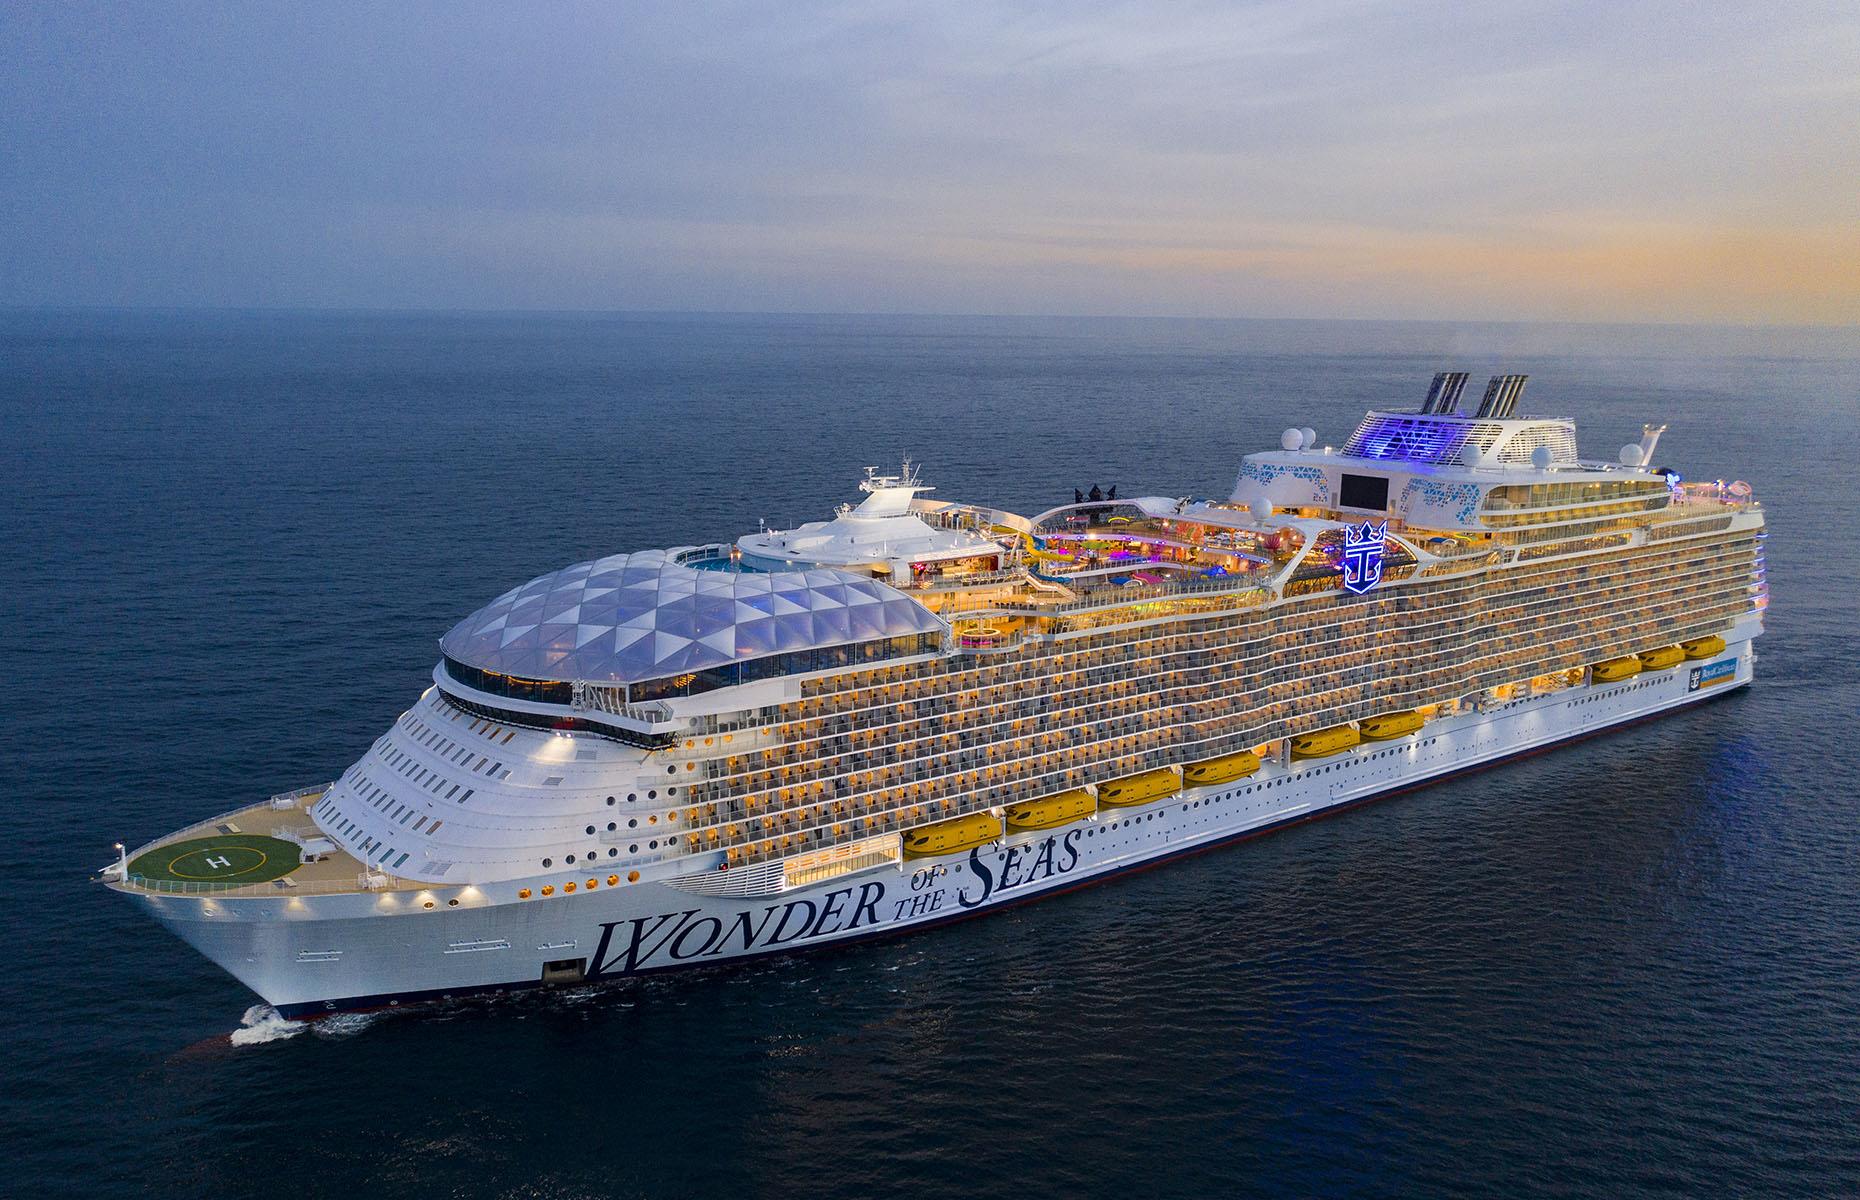 <p>Prior to the launch of <em>Icon of the Seas</em>, Royal Caribbean's fleet already boasted the world's largest cruise ship.</p>  <p><em>Wonder of the Seas</em> (pictured) first set sail in 2022 and is only fractionally shorter than <em>Icon</em>. It can carry a total of 7,084 guests, with an international crew of 2,204 people. The vessel boasts 18 decks, just two fewer than its larger (yet younger) sister.</p>